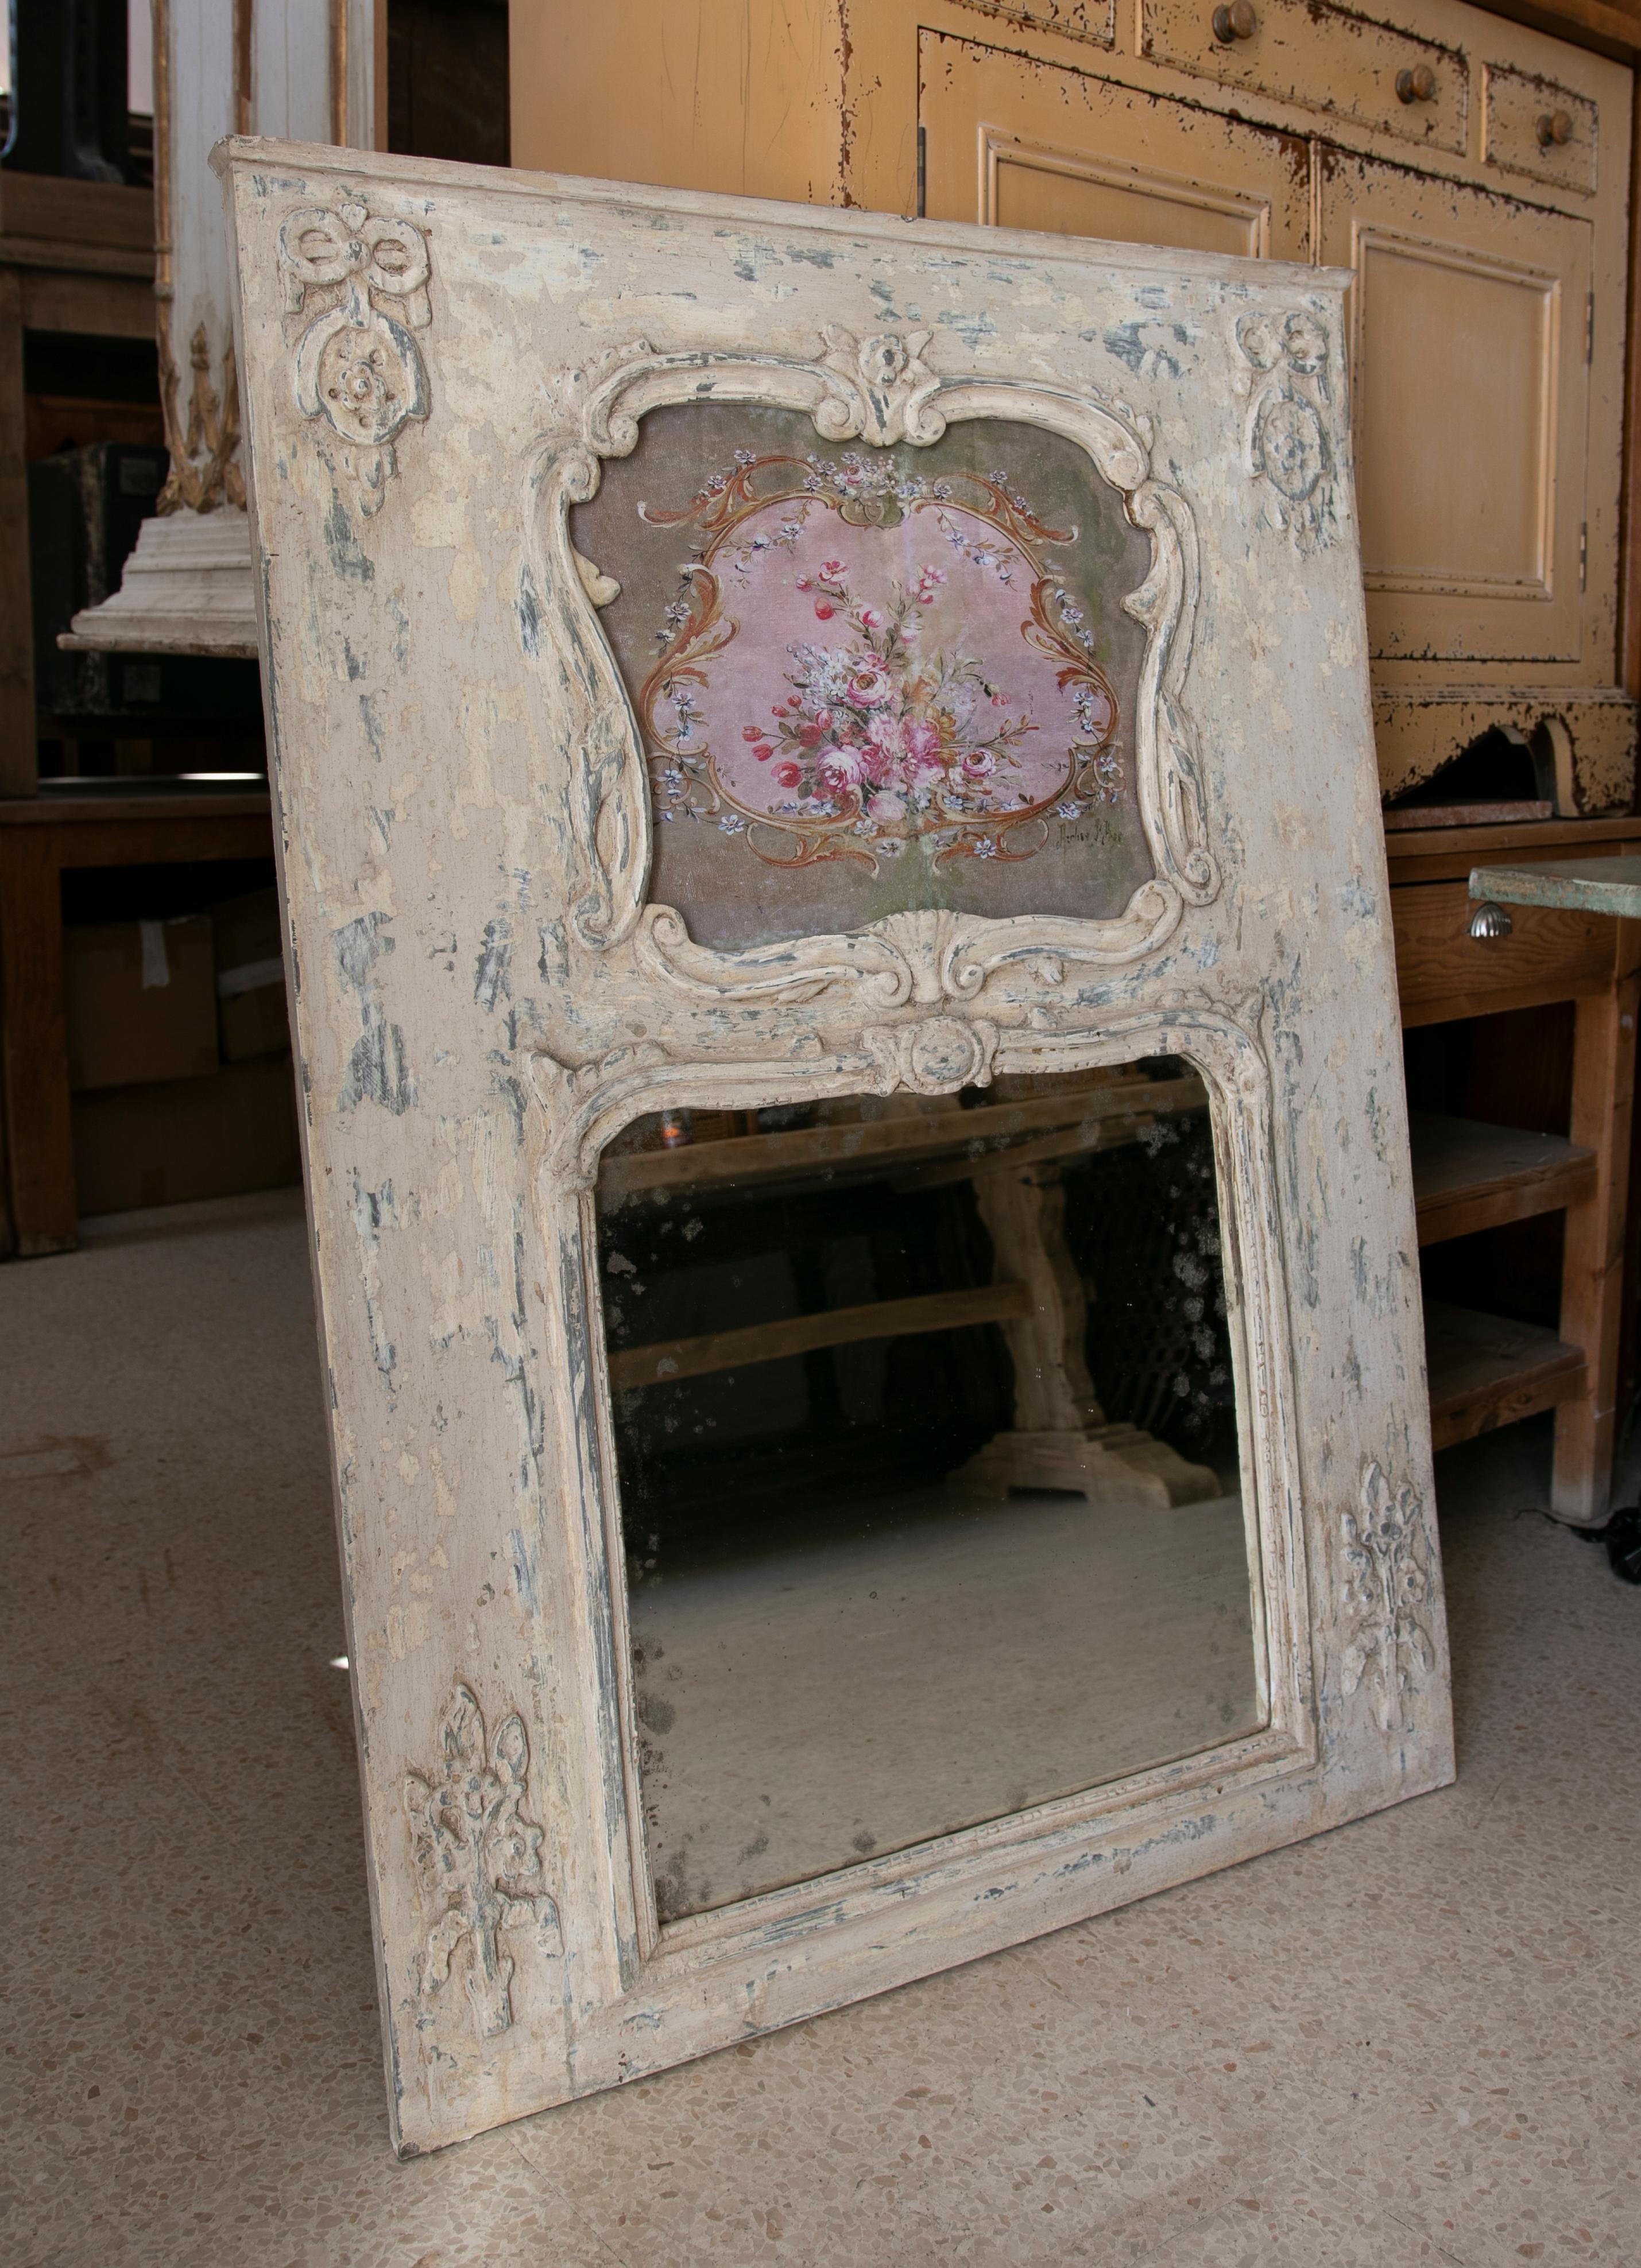 Hand-carved and Polychromed wooden Trumeau wall mirror.